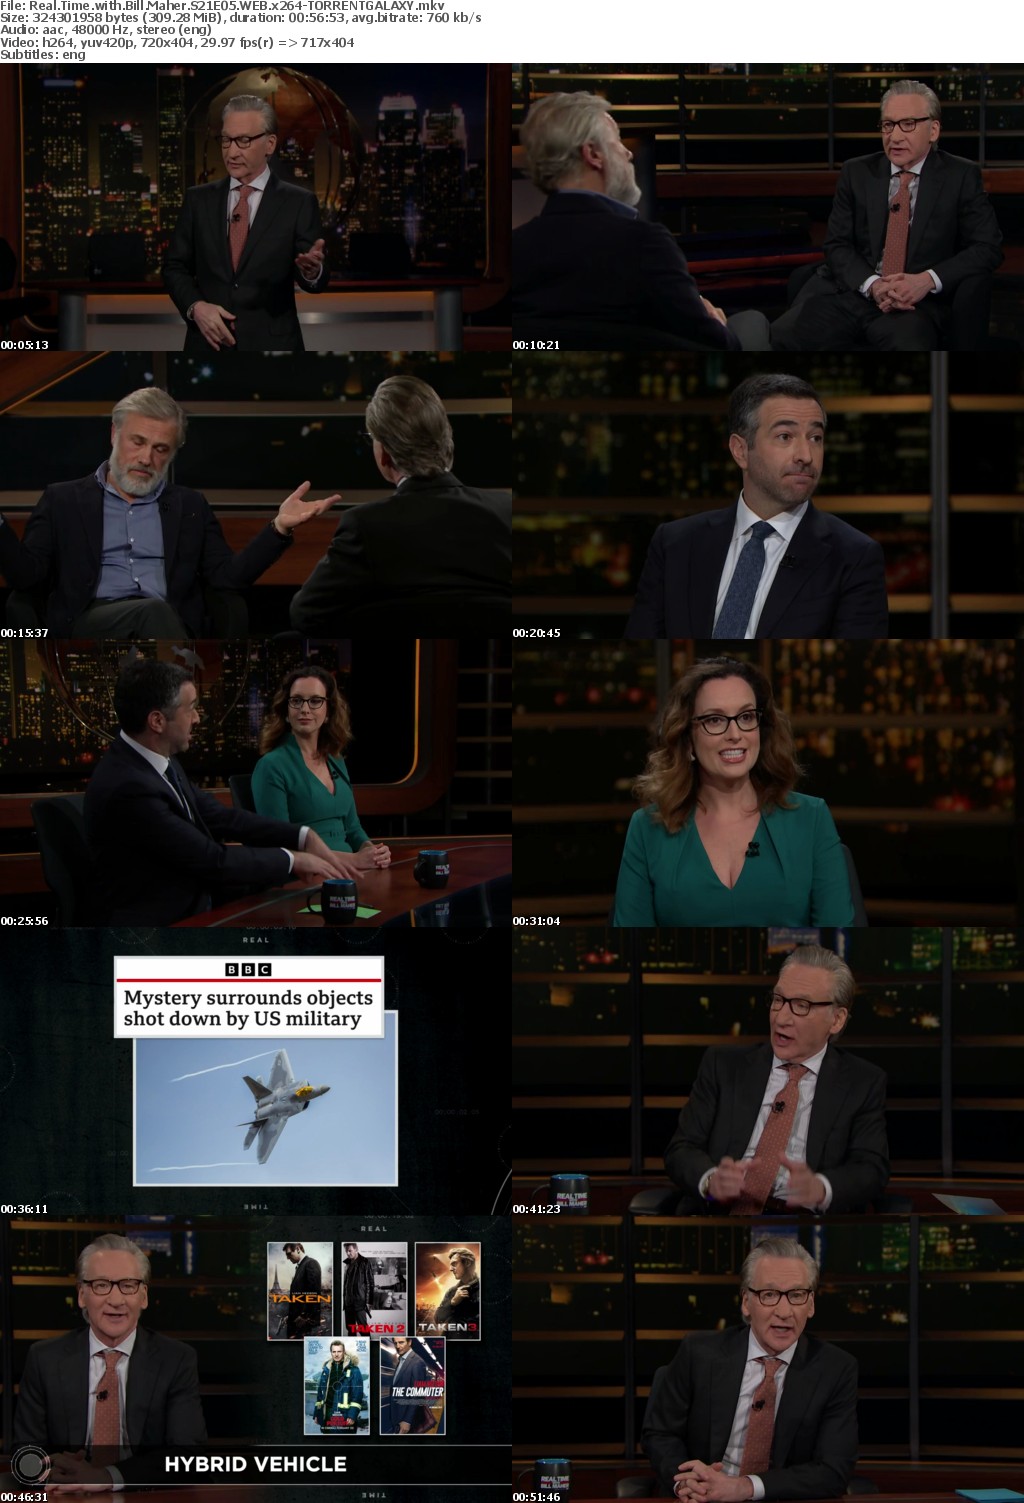 Real Time with Bill Maher S21E05 WEB x264-GALAXY